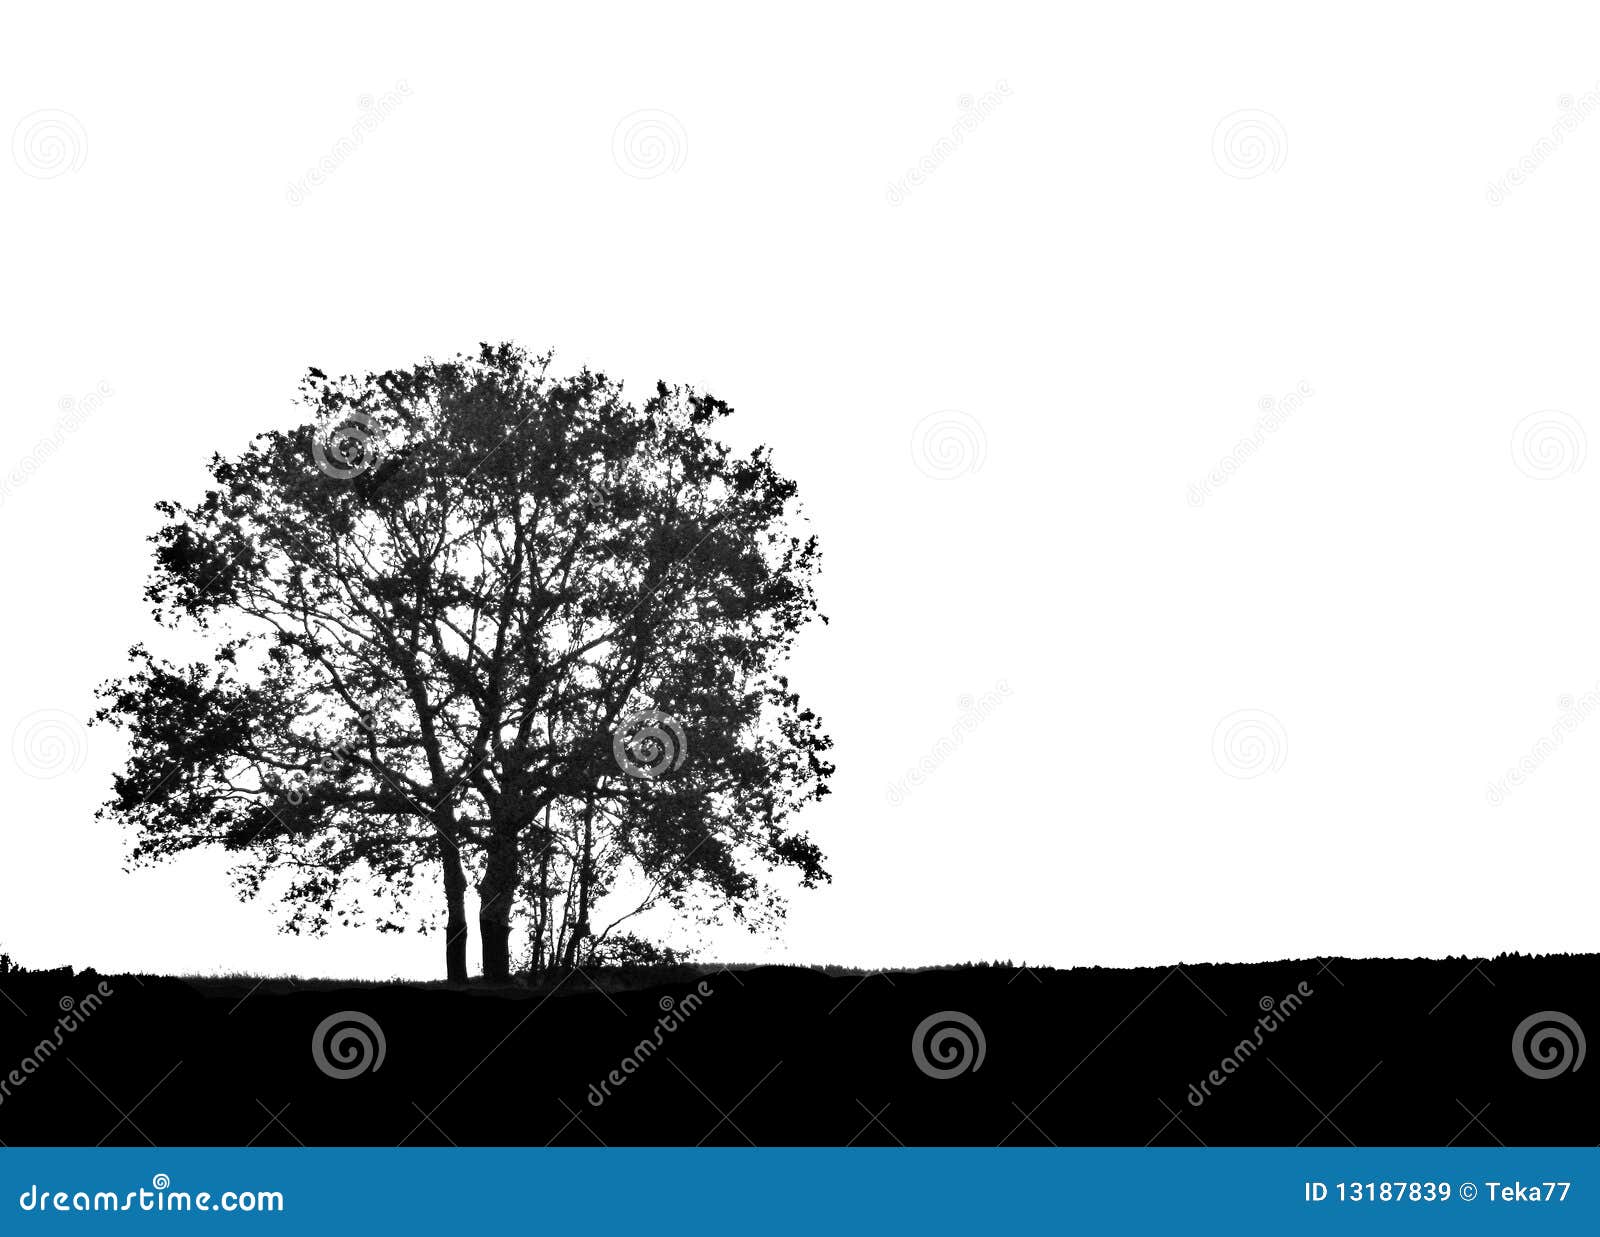 Shadowtree. An black tree in front of a plain white background, ideal for big illustrations